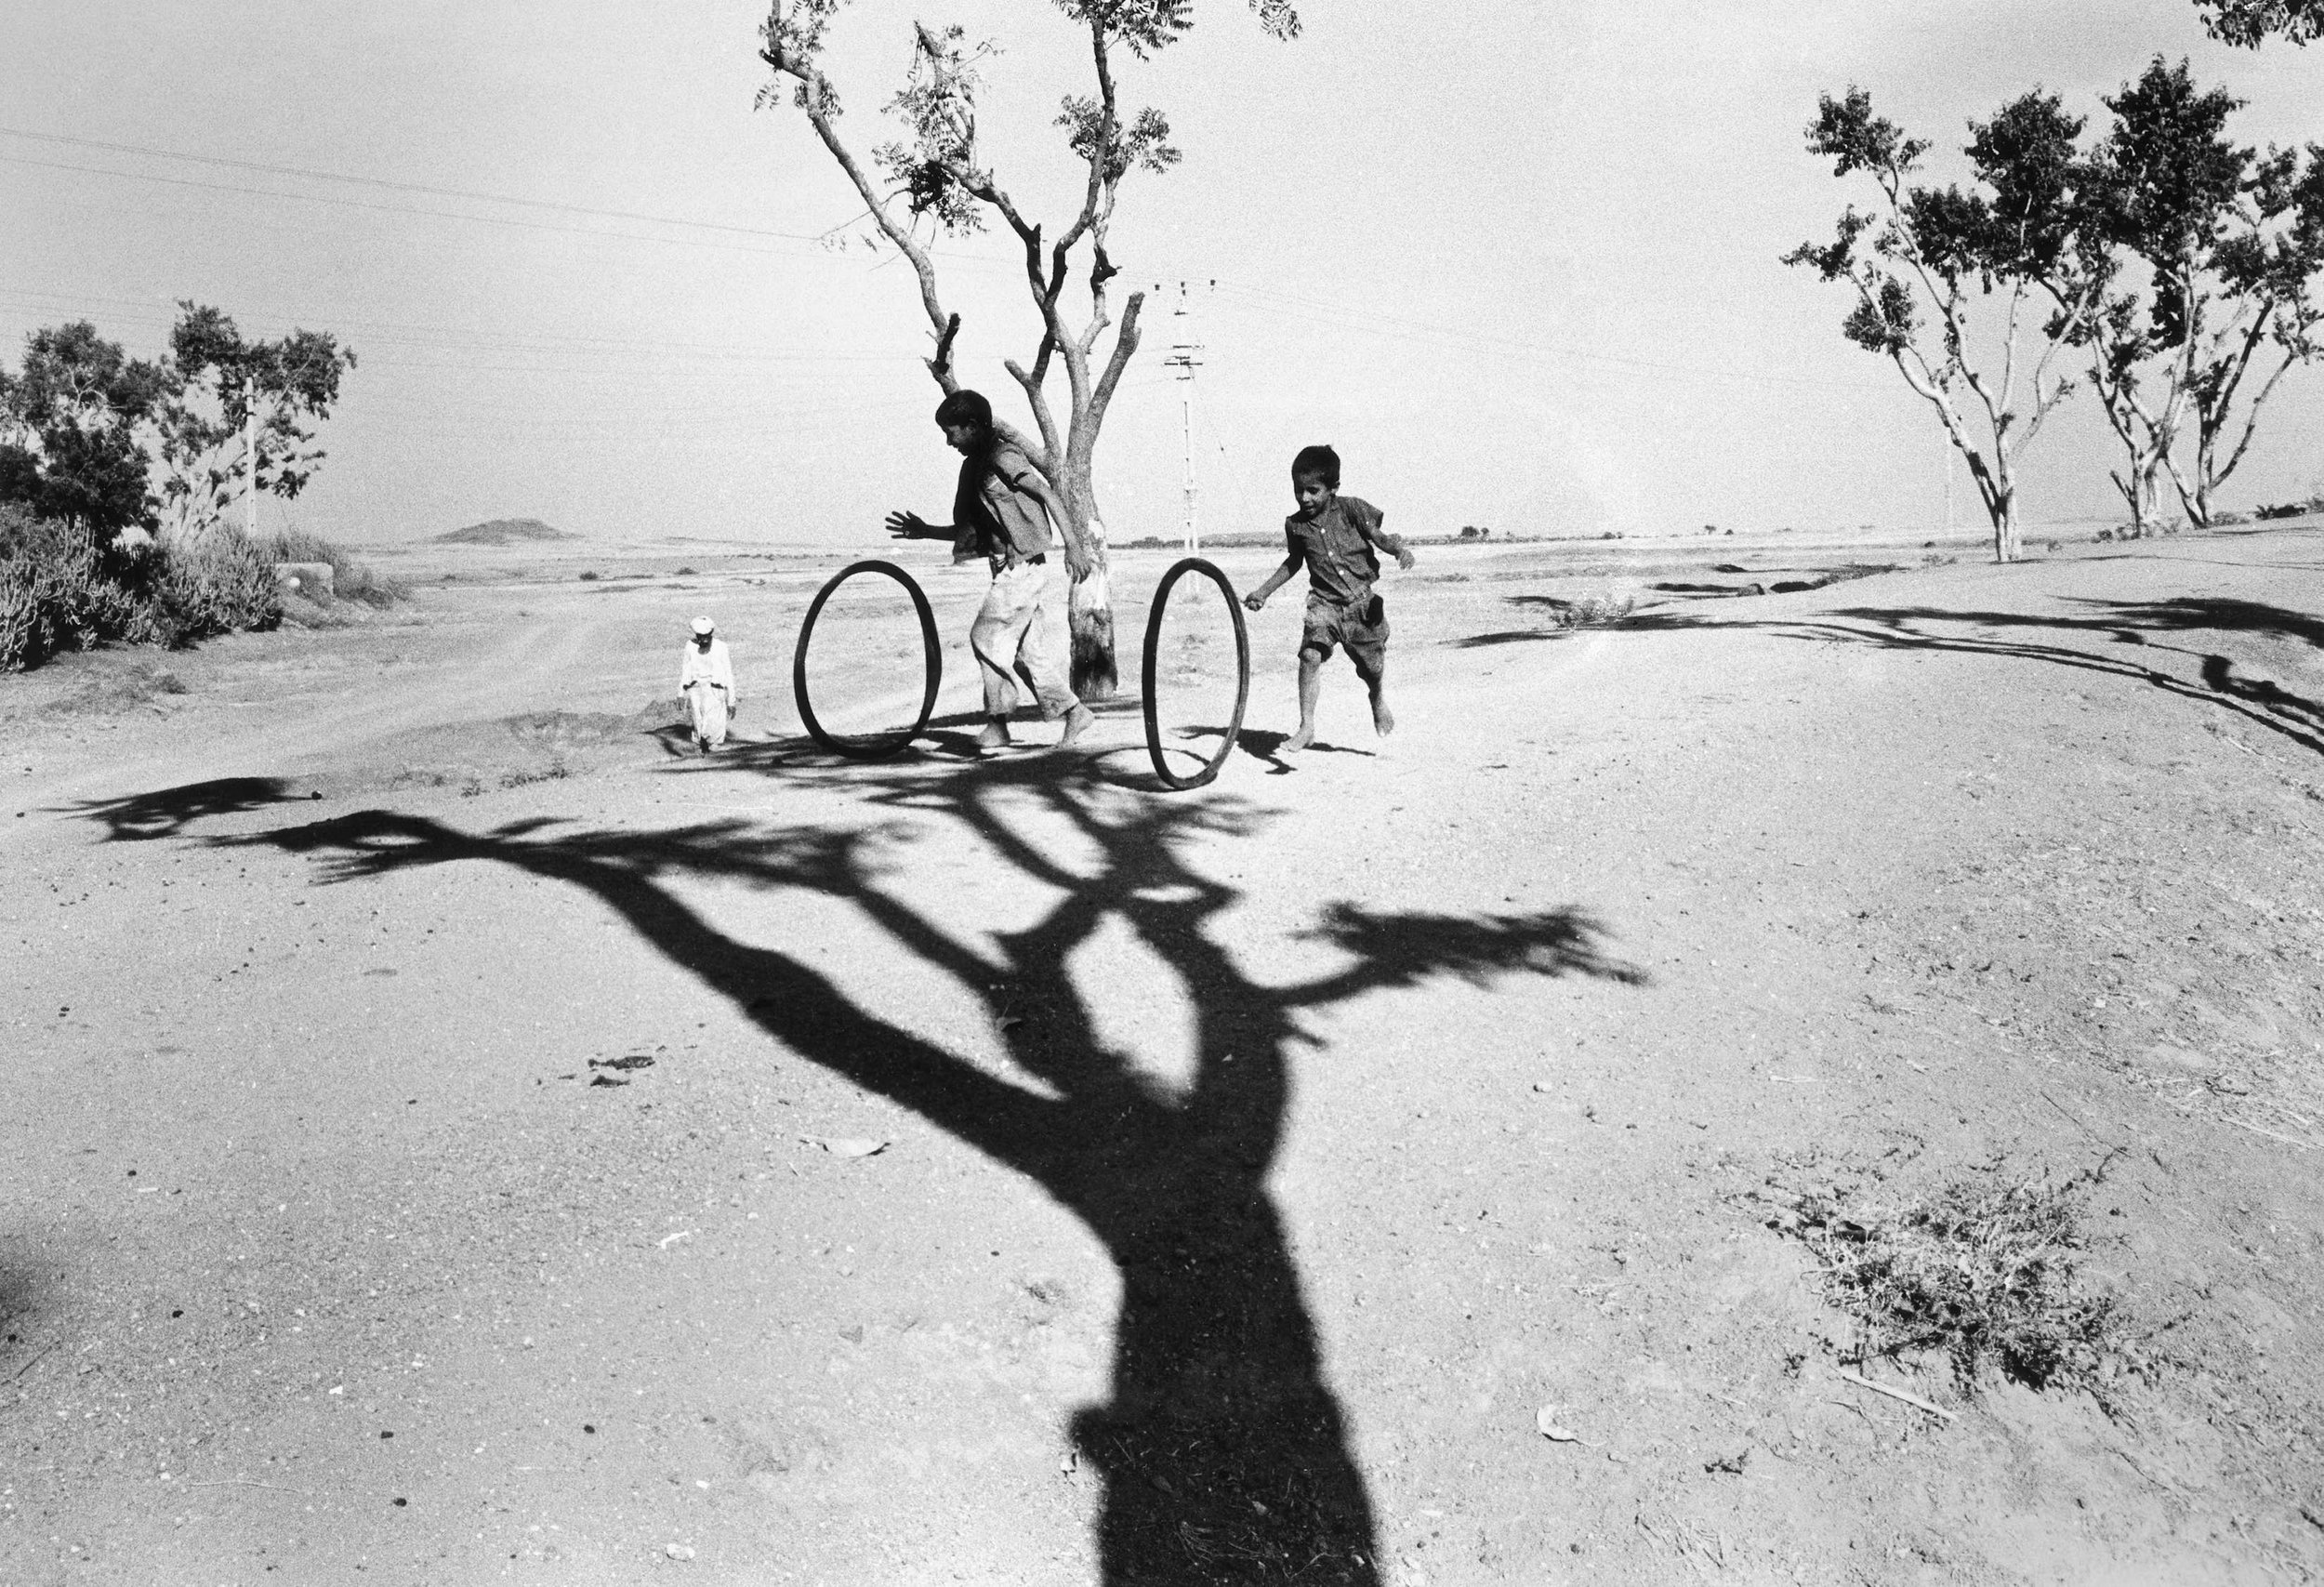  Bhupendra Karia,  Boys playing hoops in landscape, Gonda l, 1969 